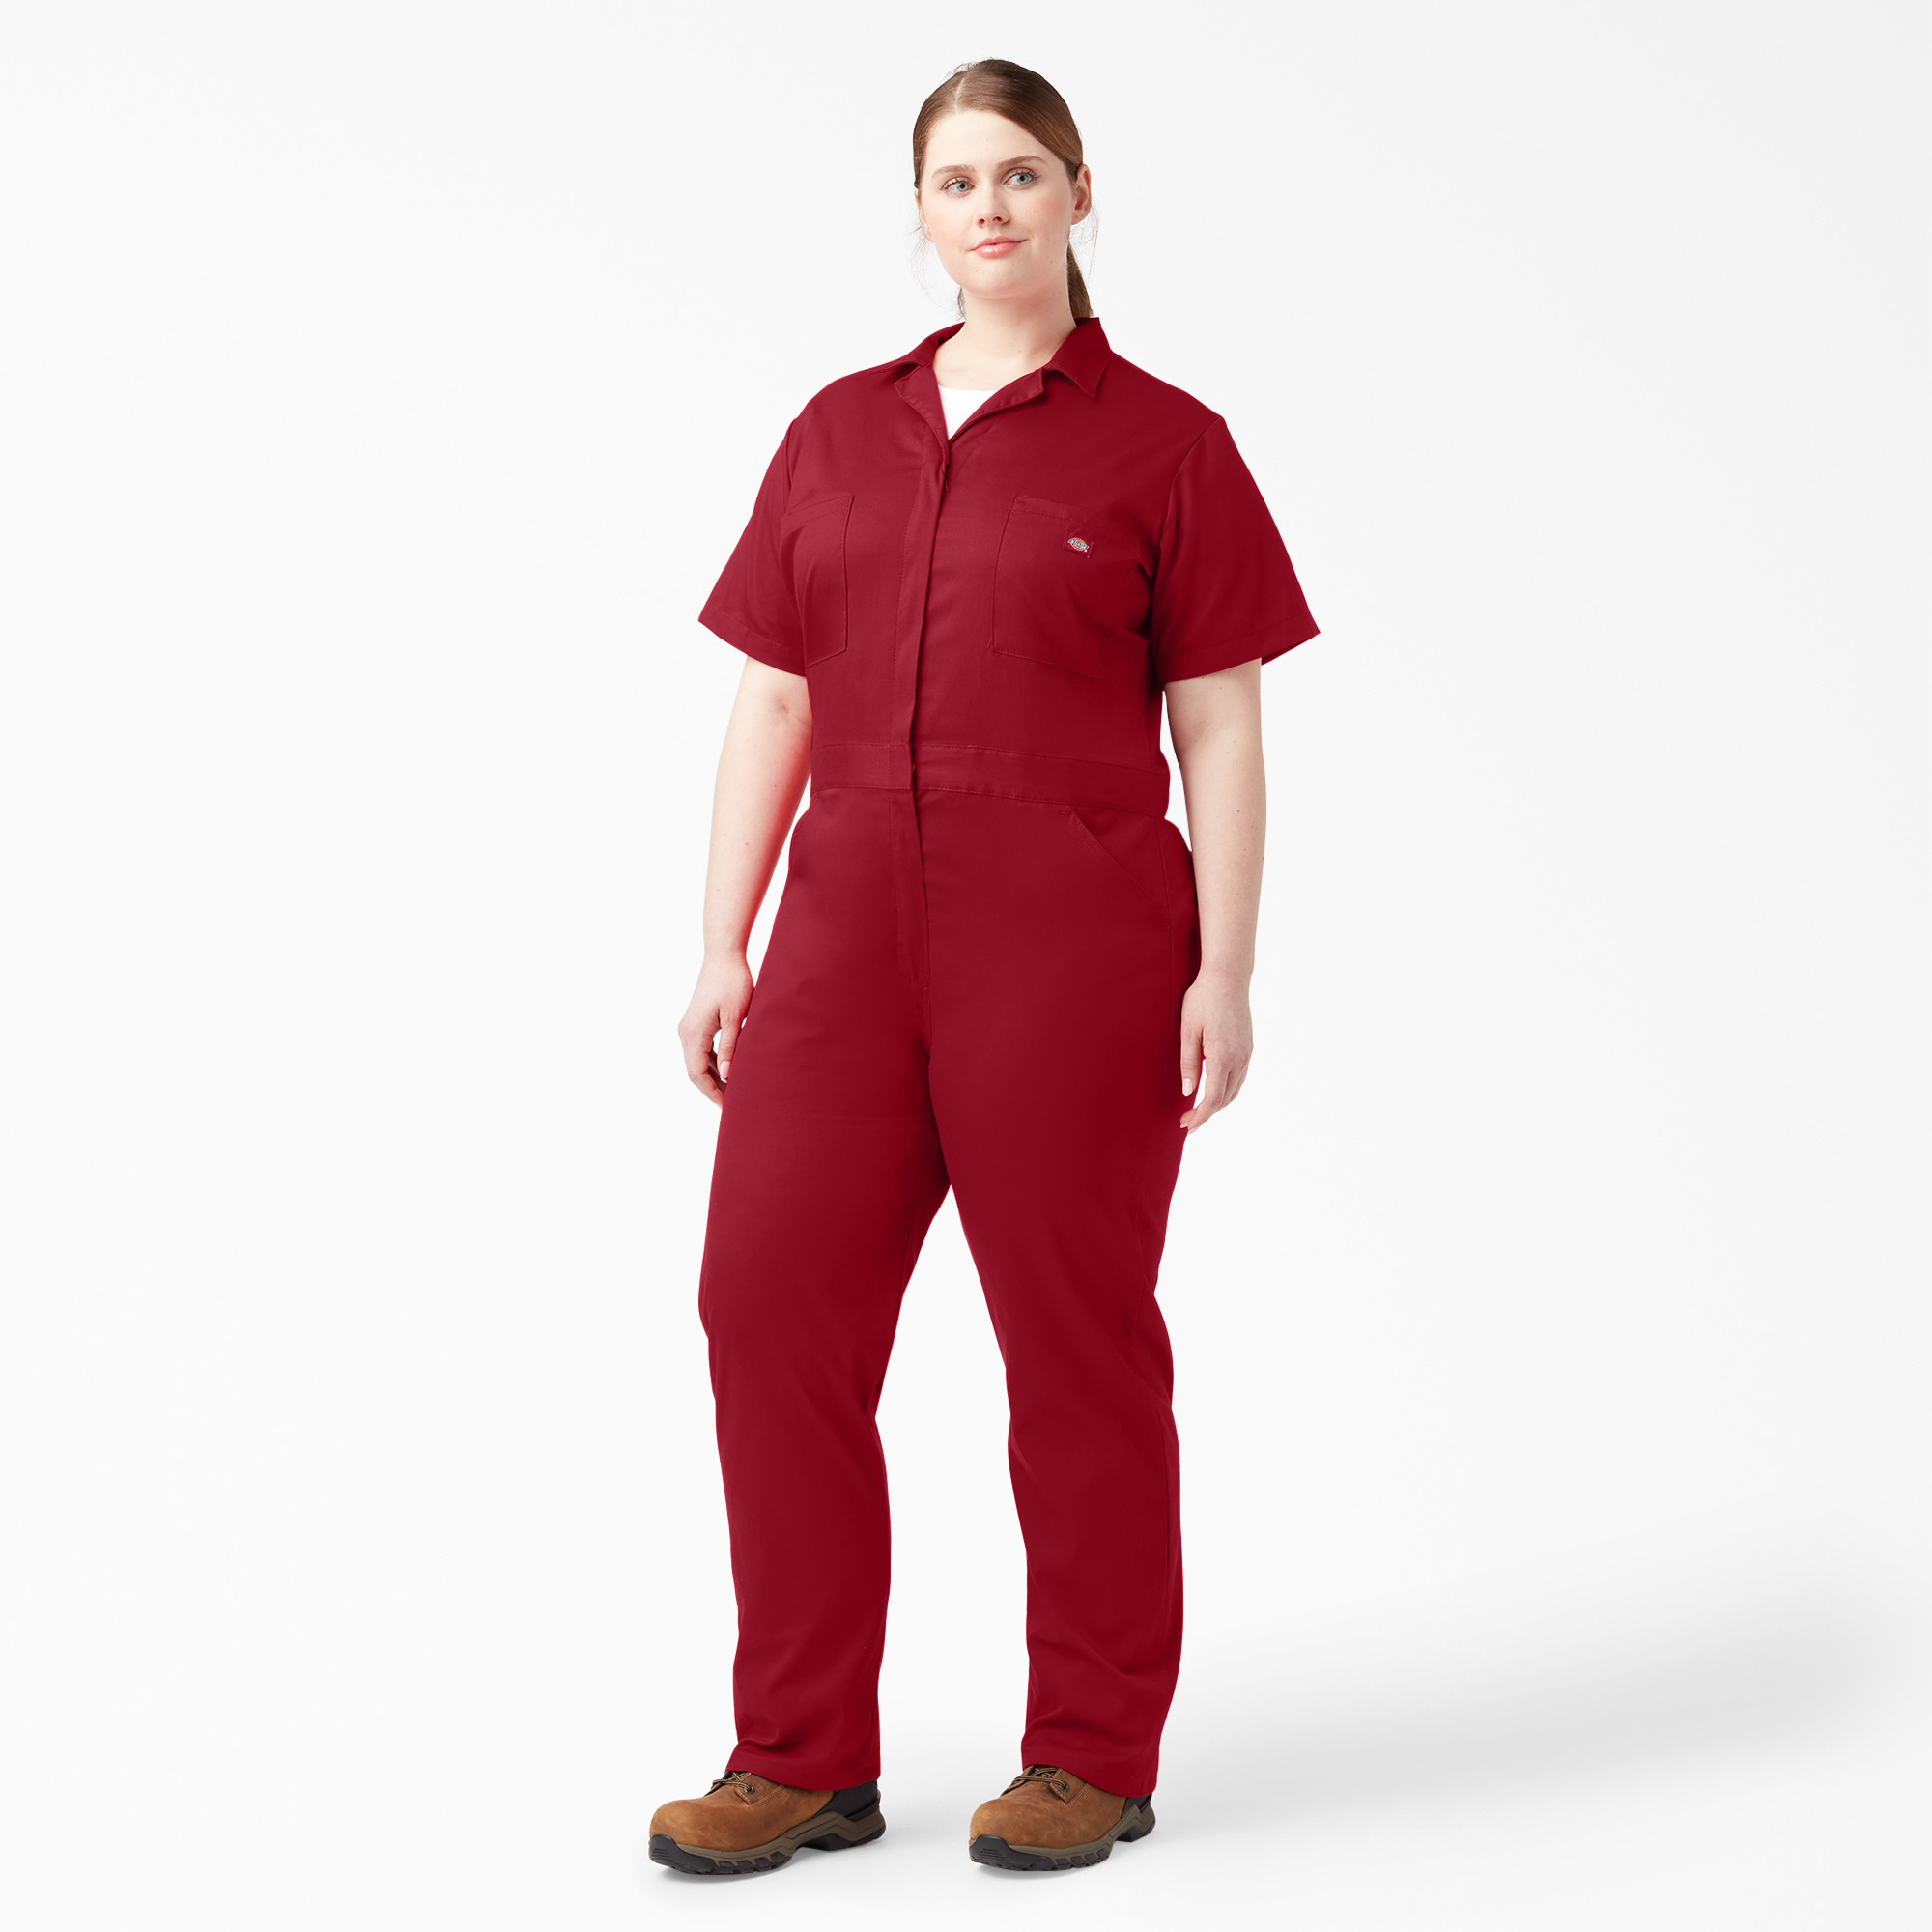 Women's Plus FLEX Cooling Short Sleeve Coveralls - English Red (ER)